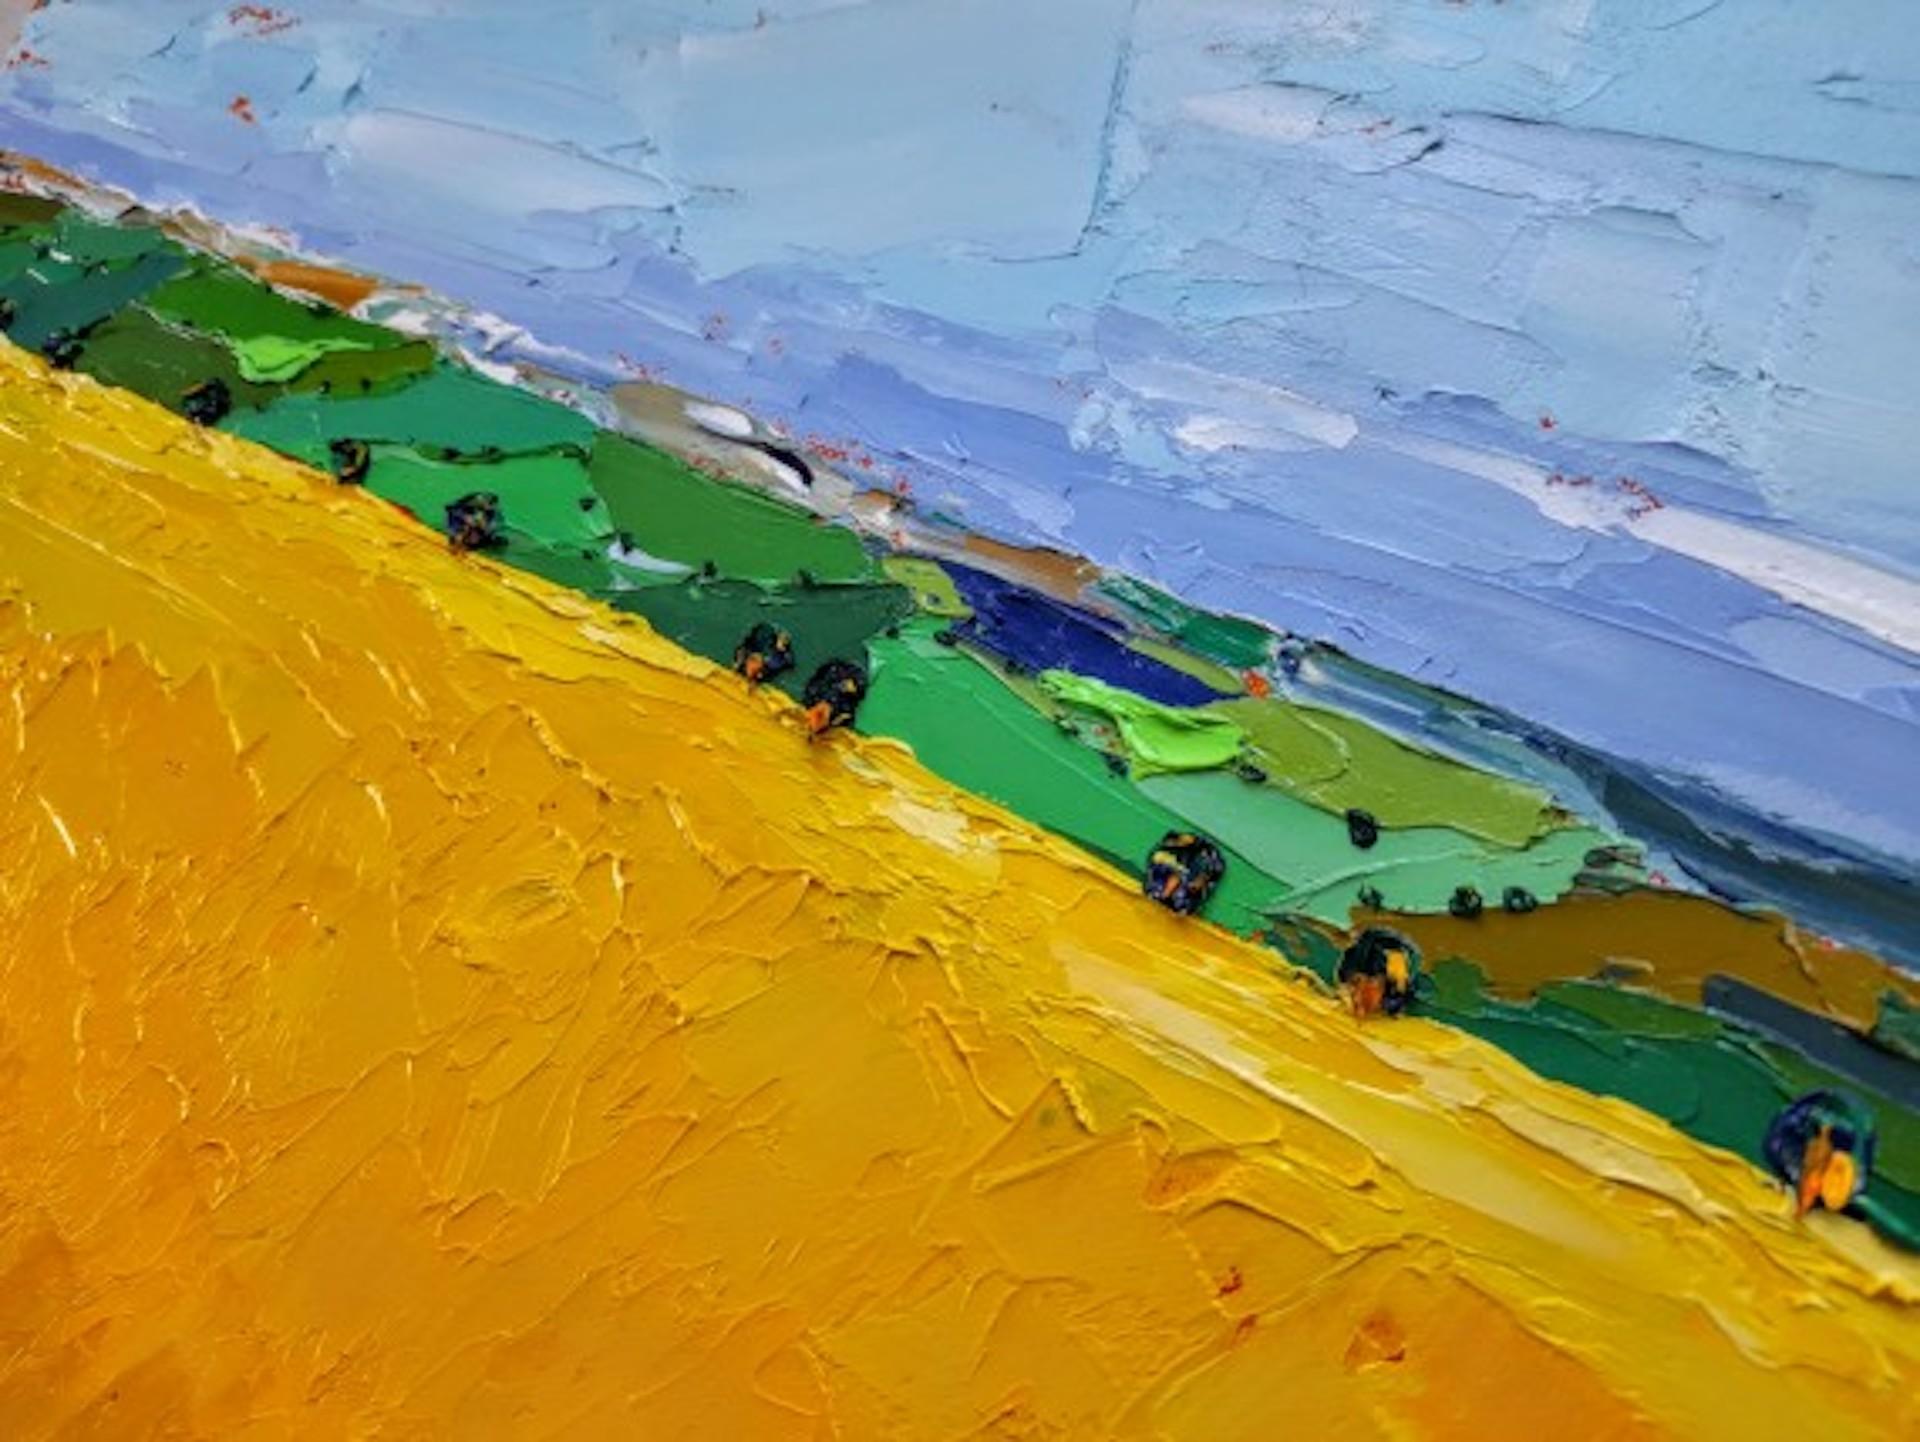 Cotswold Barley Field [2021]
Original
Landscapes 
Oil paint on canvas
Canvas Size: H:40 cm x W:50 cm x D:2cm
Sold Unframed
Please note that insitu images are purely an indication of how a piece may look

'Cotswold Barley Field' is an original